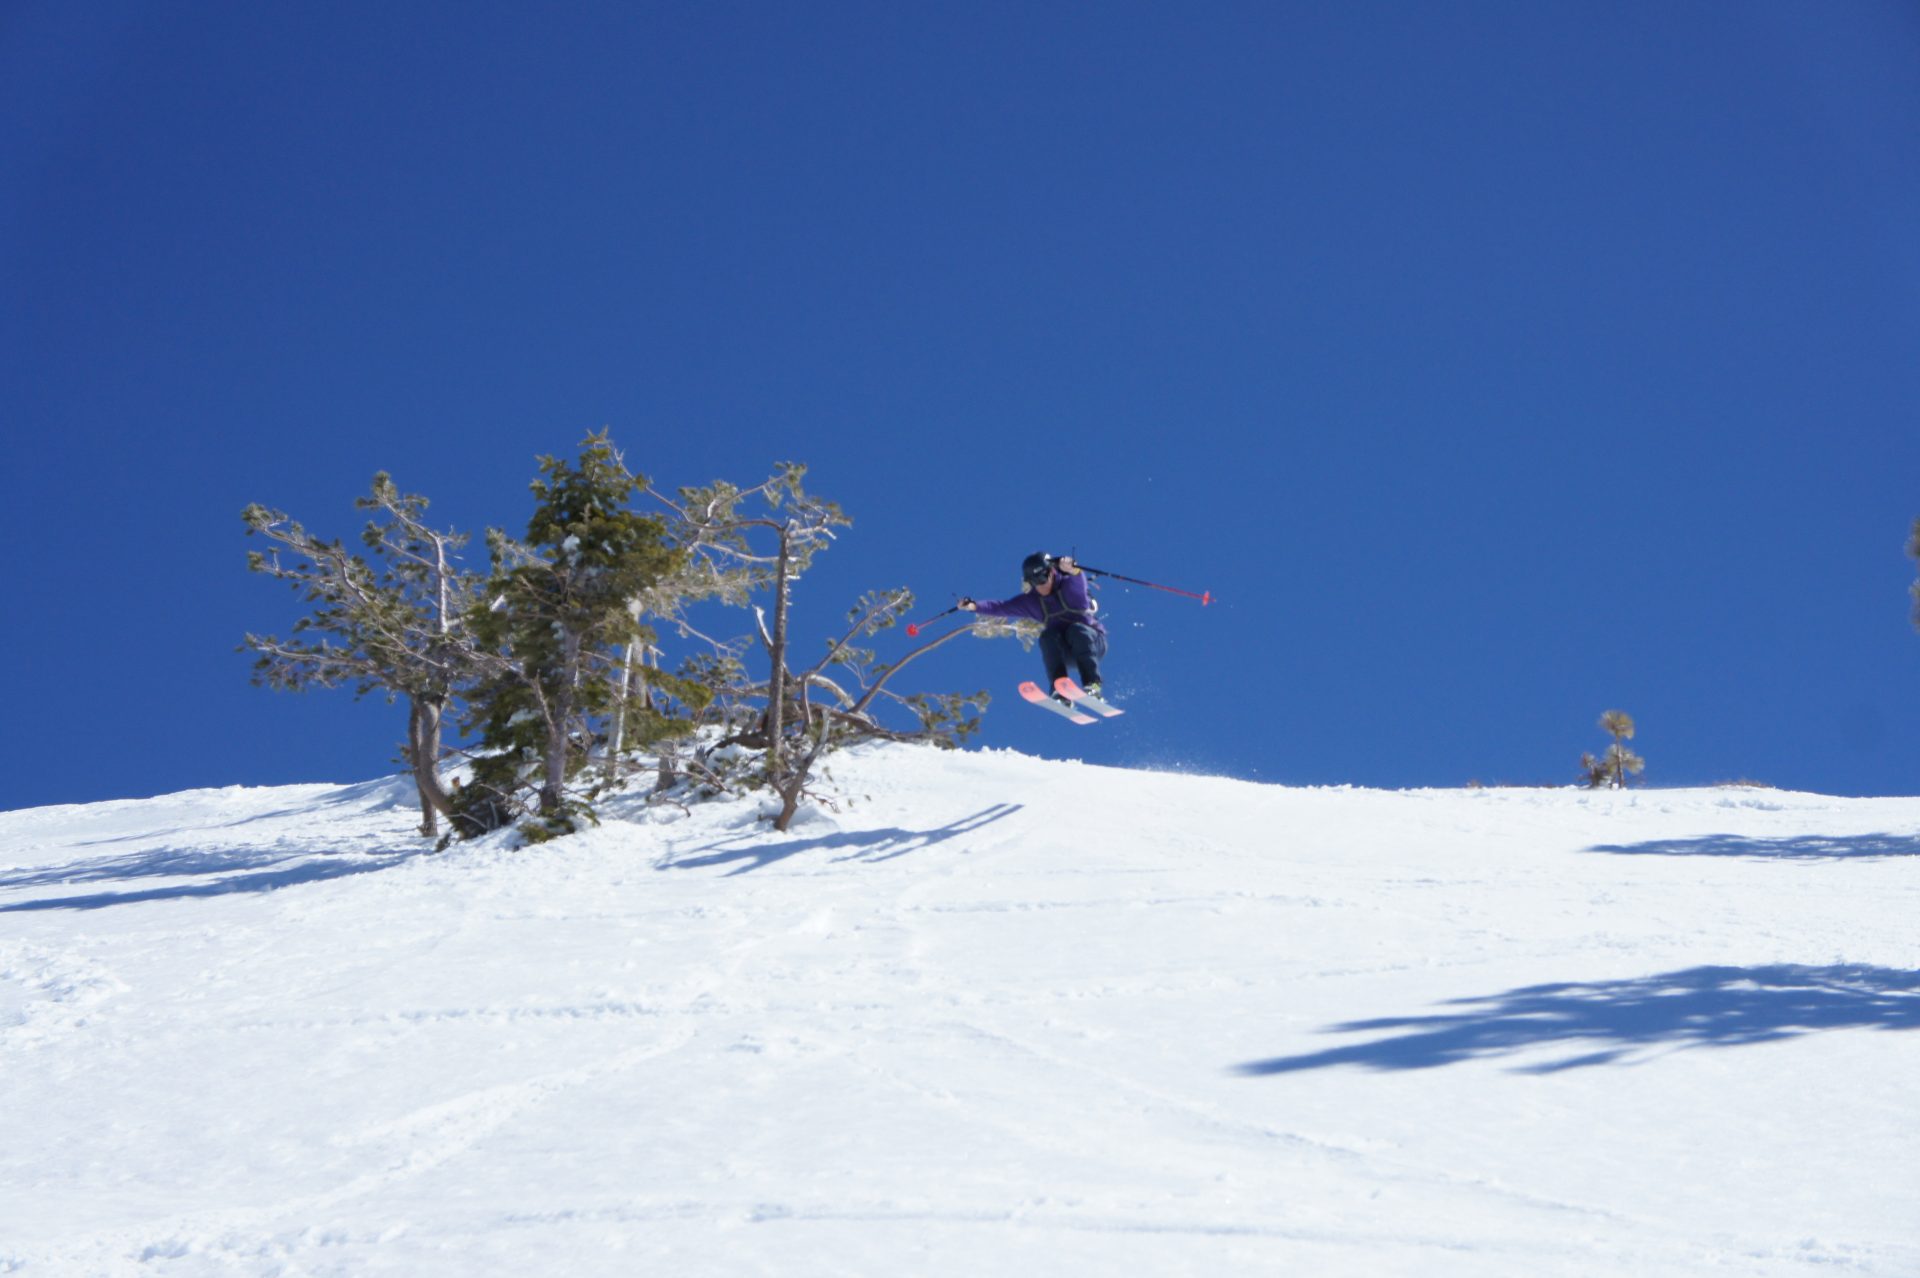 skier jumping on bluebird day next to a small tree